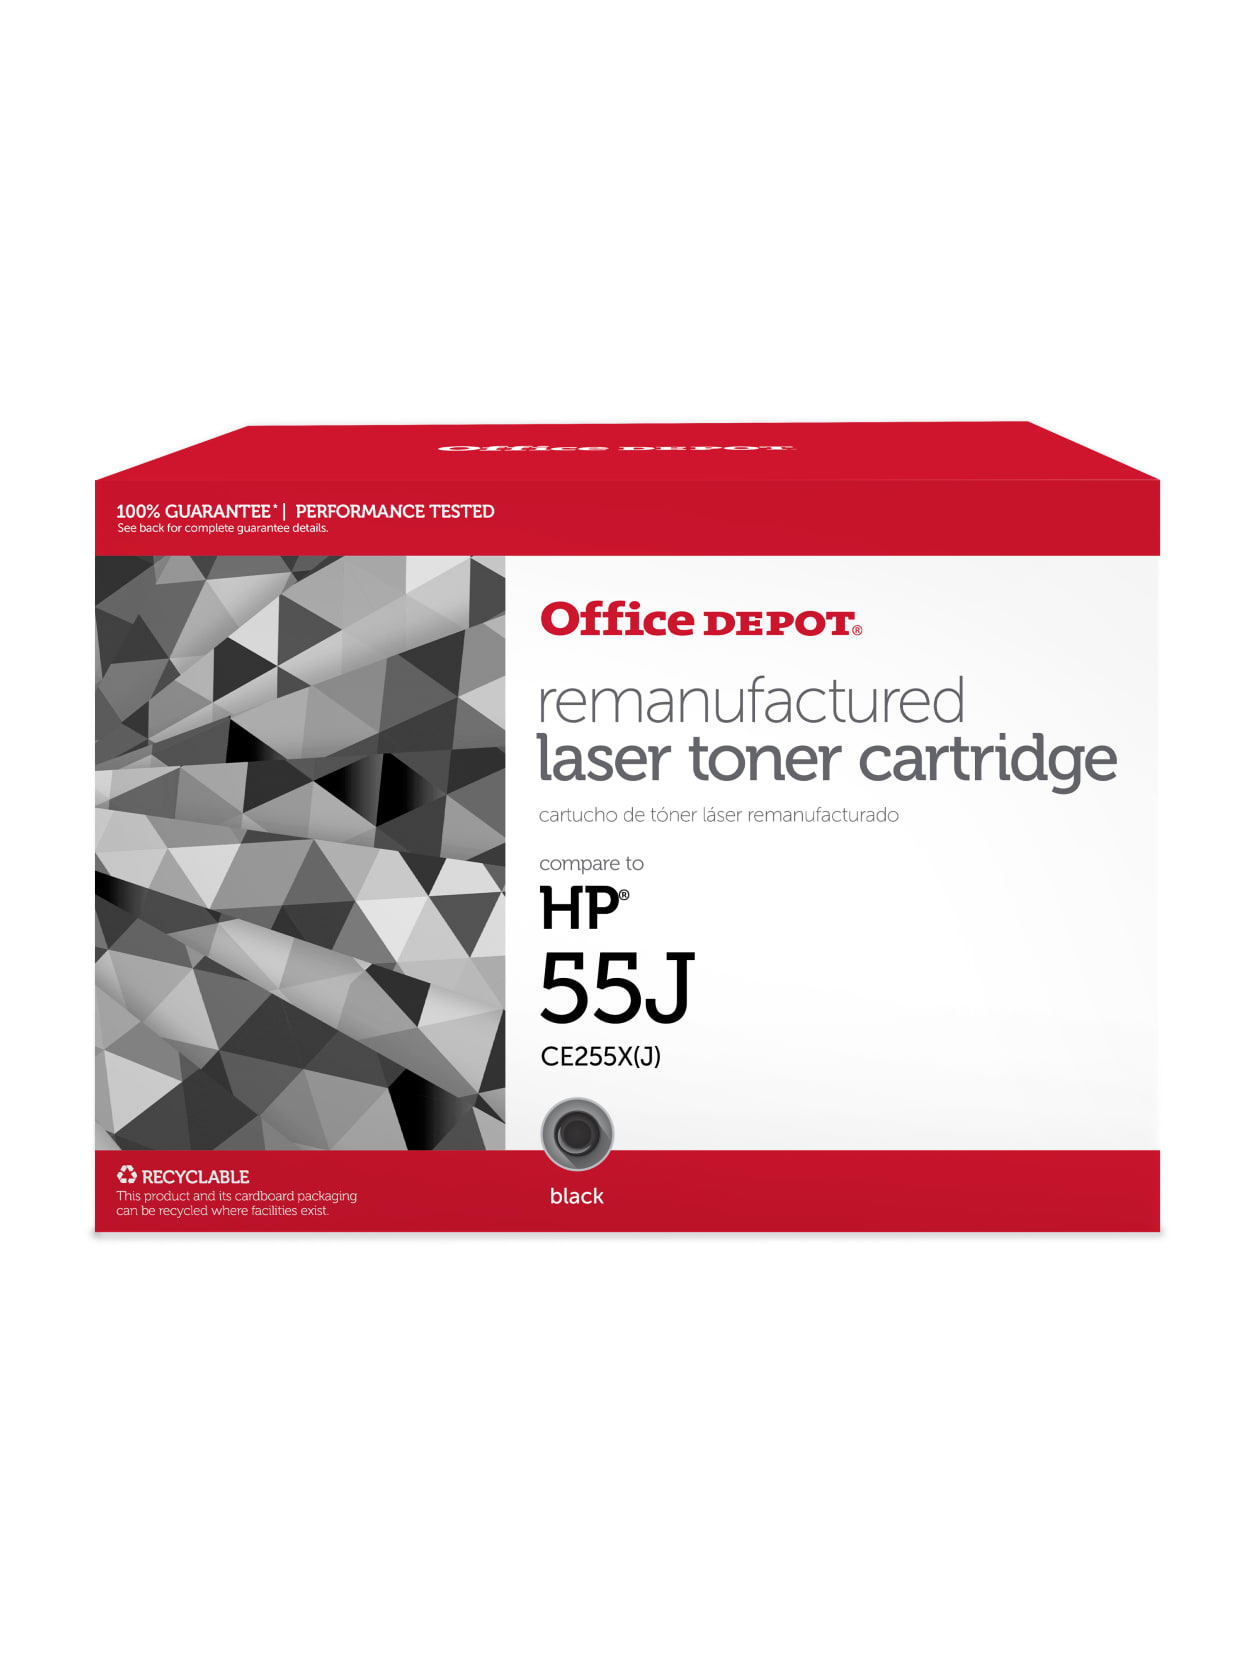 Black 1-2 Day DELIVERY Quality Supplies Direct Compatible HP CE255X Remanufactured MICR Toner